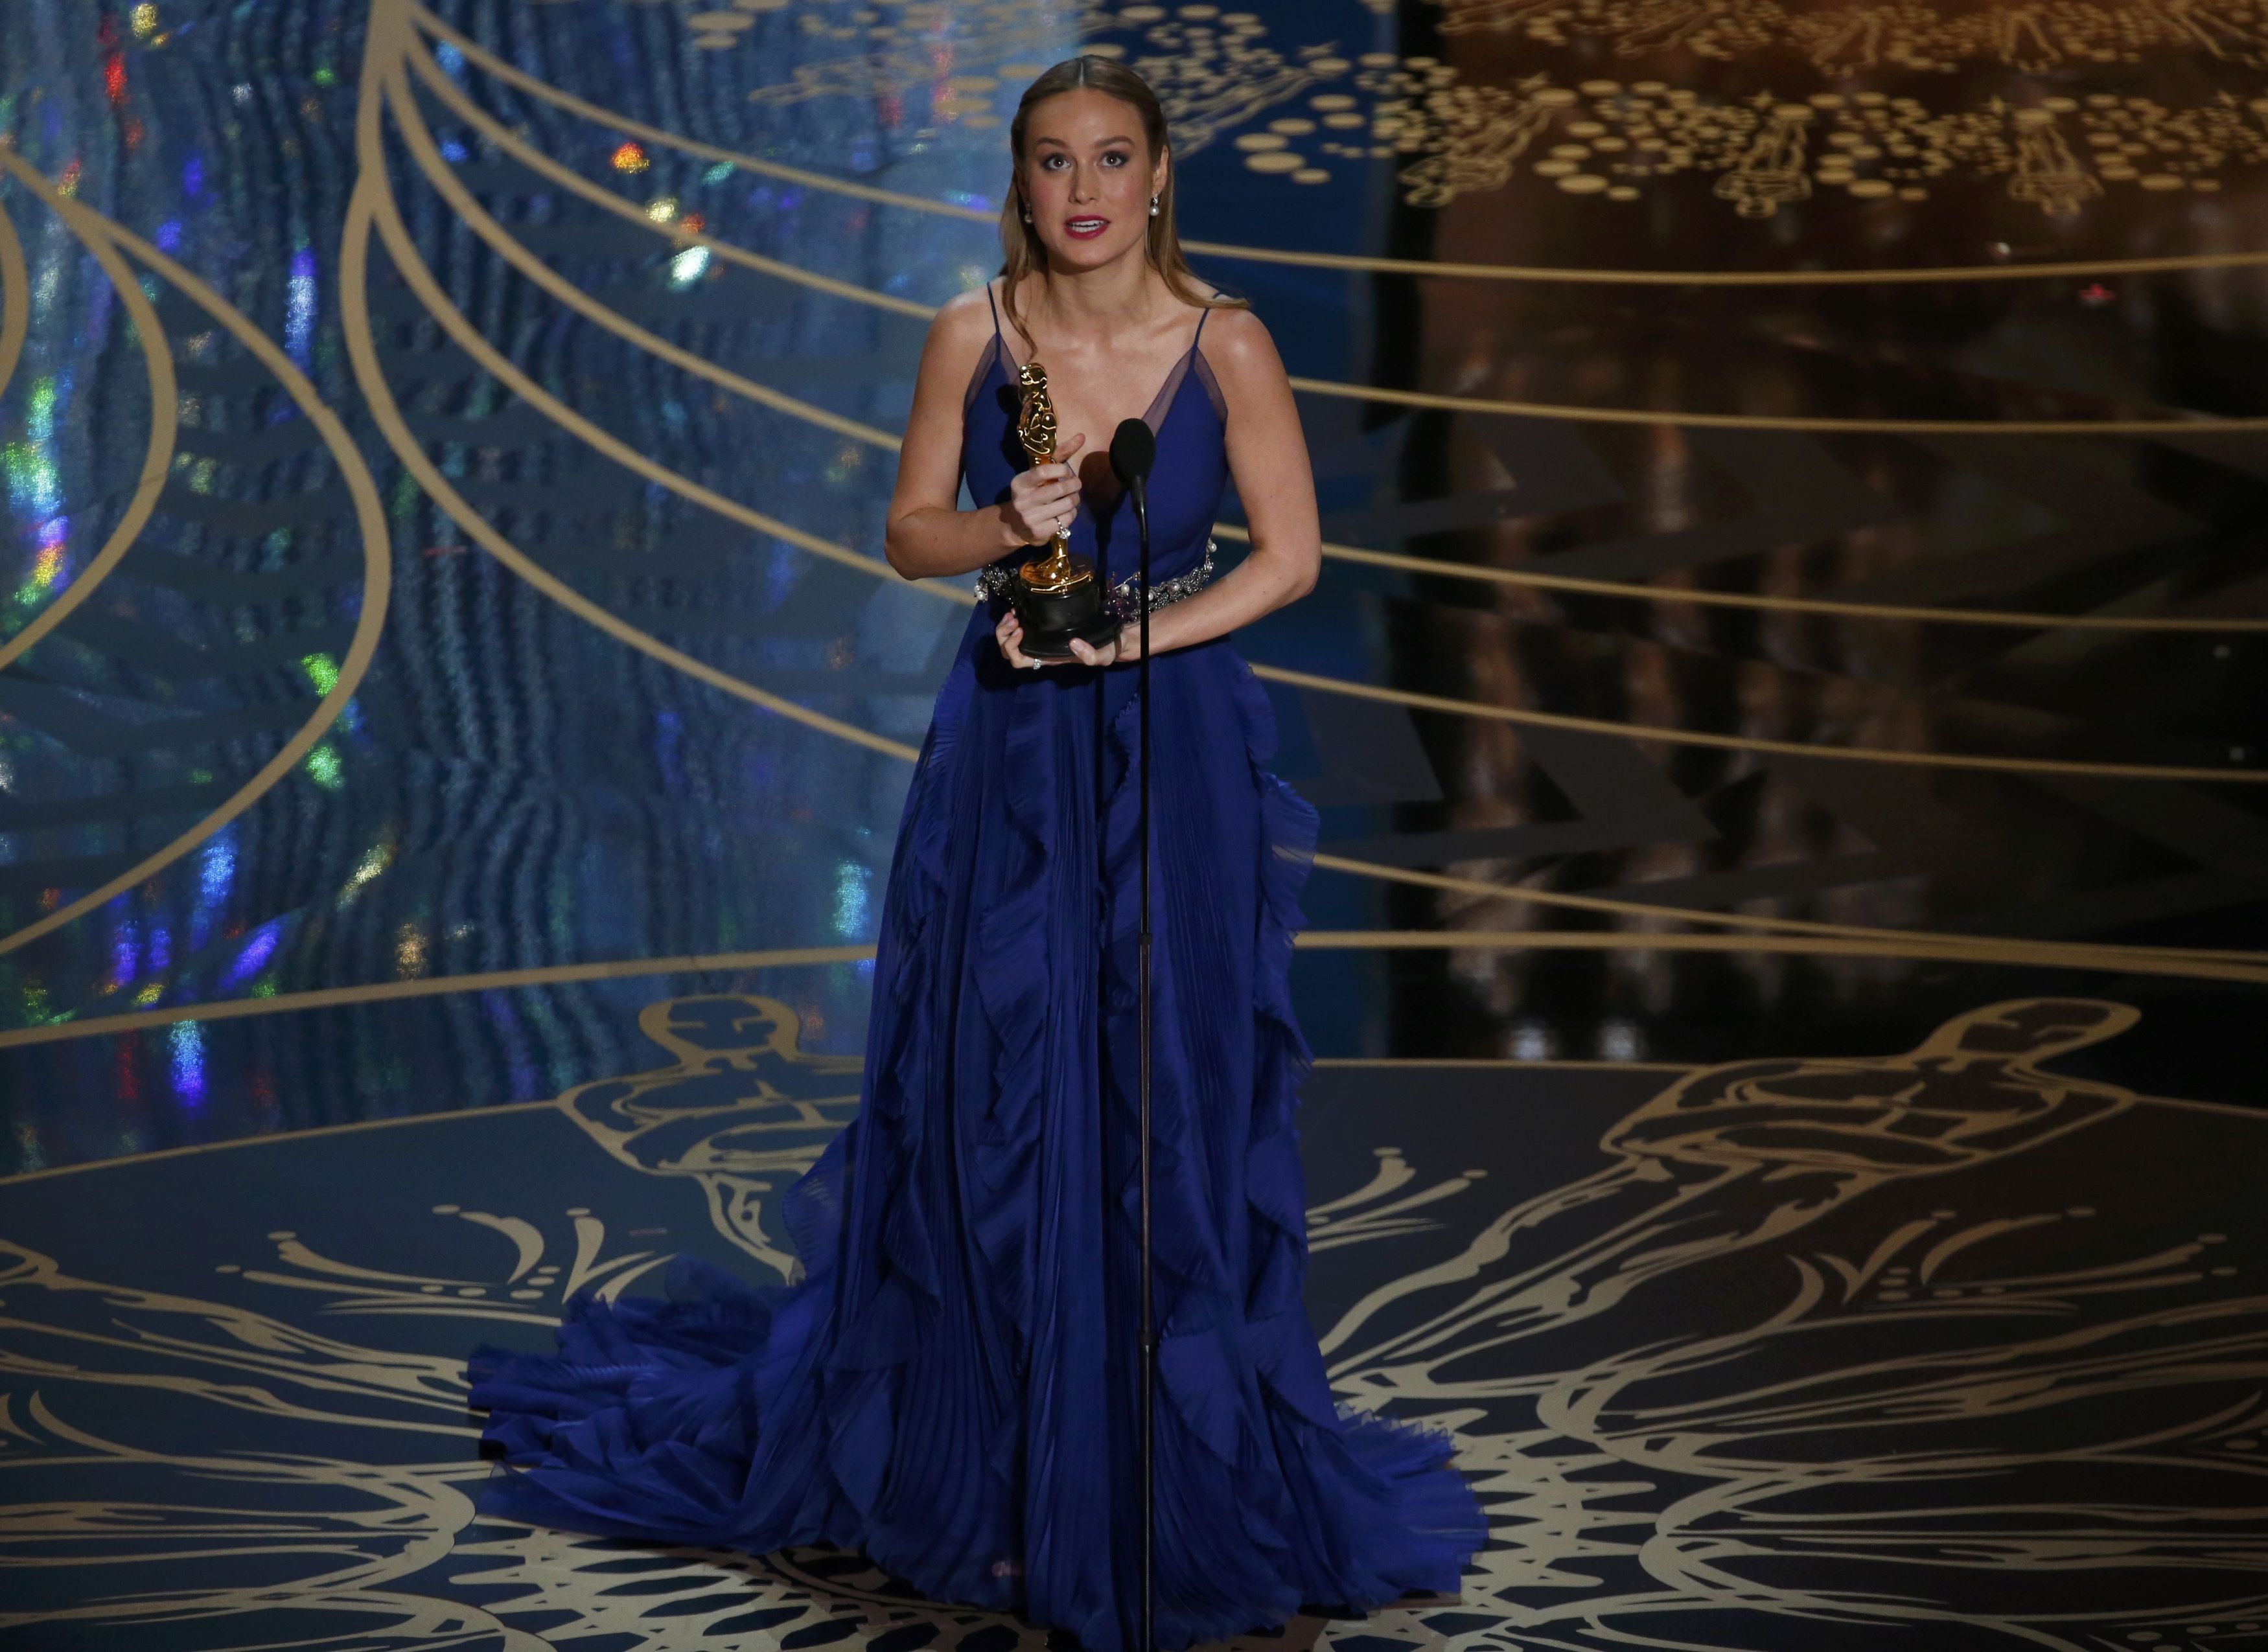 Brie Larson accepts the Oscar for Best Actress for her role in "Room" at the 88th Academy Awards in Hollywood, California February 28, 2016.  REUTERS/Mario Anzuoni